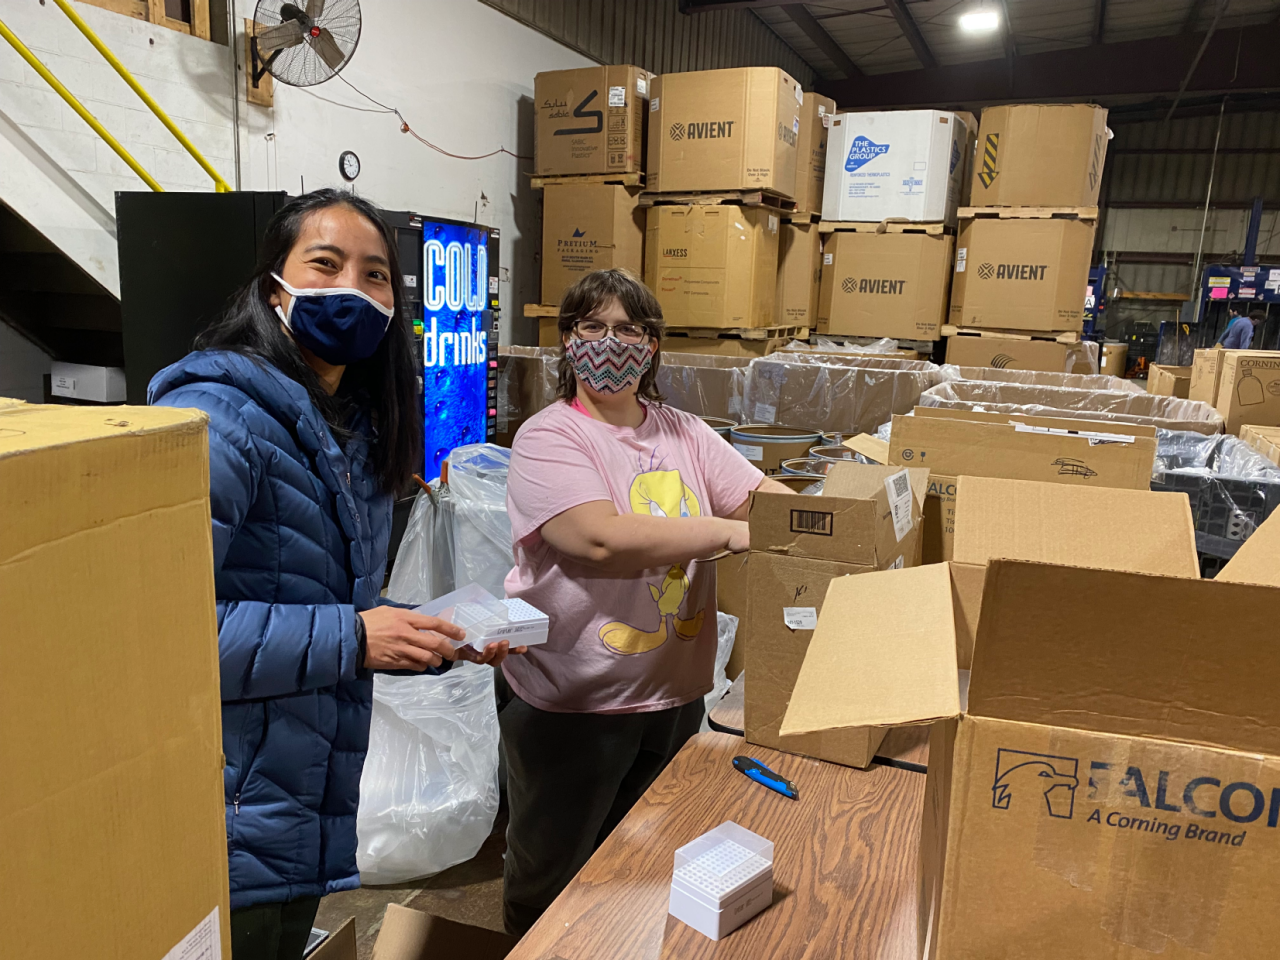 Cynthia Lin, global sustainability manager, Life Sciences, helps sort packaging from Corning’s takeback program with employee Katrina.